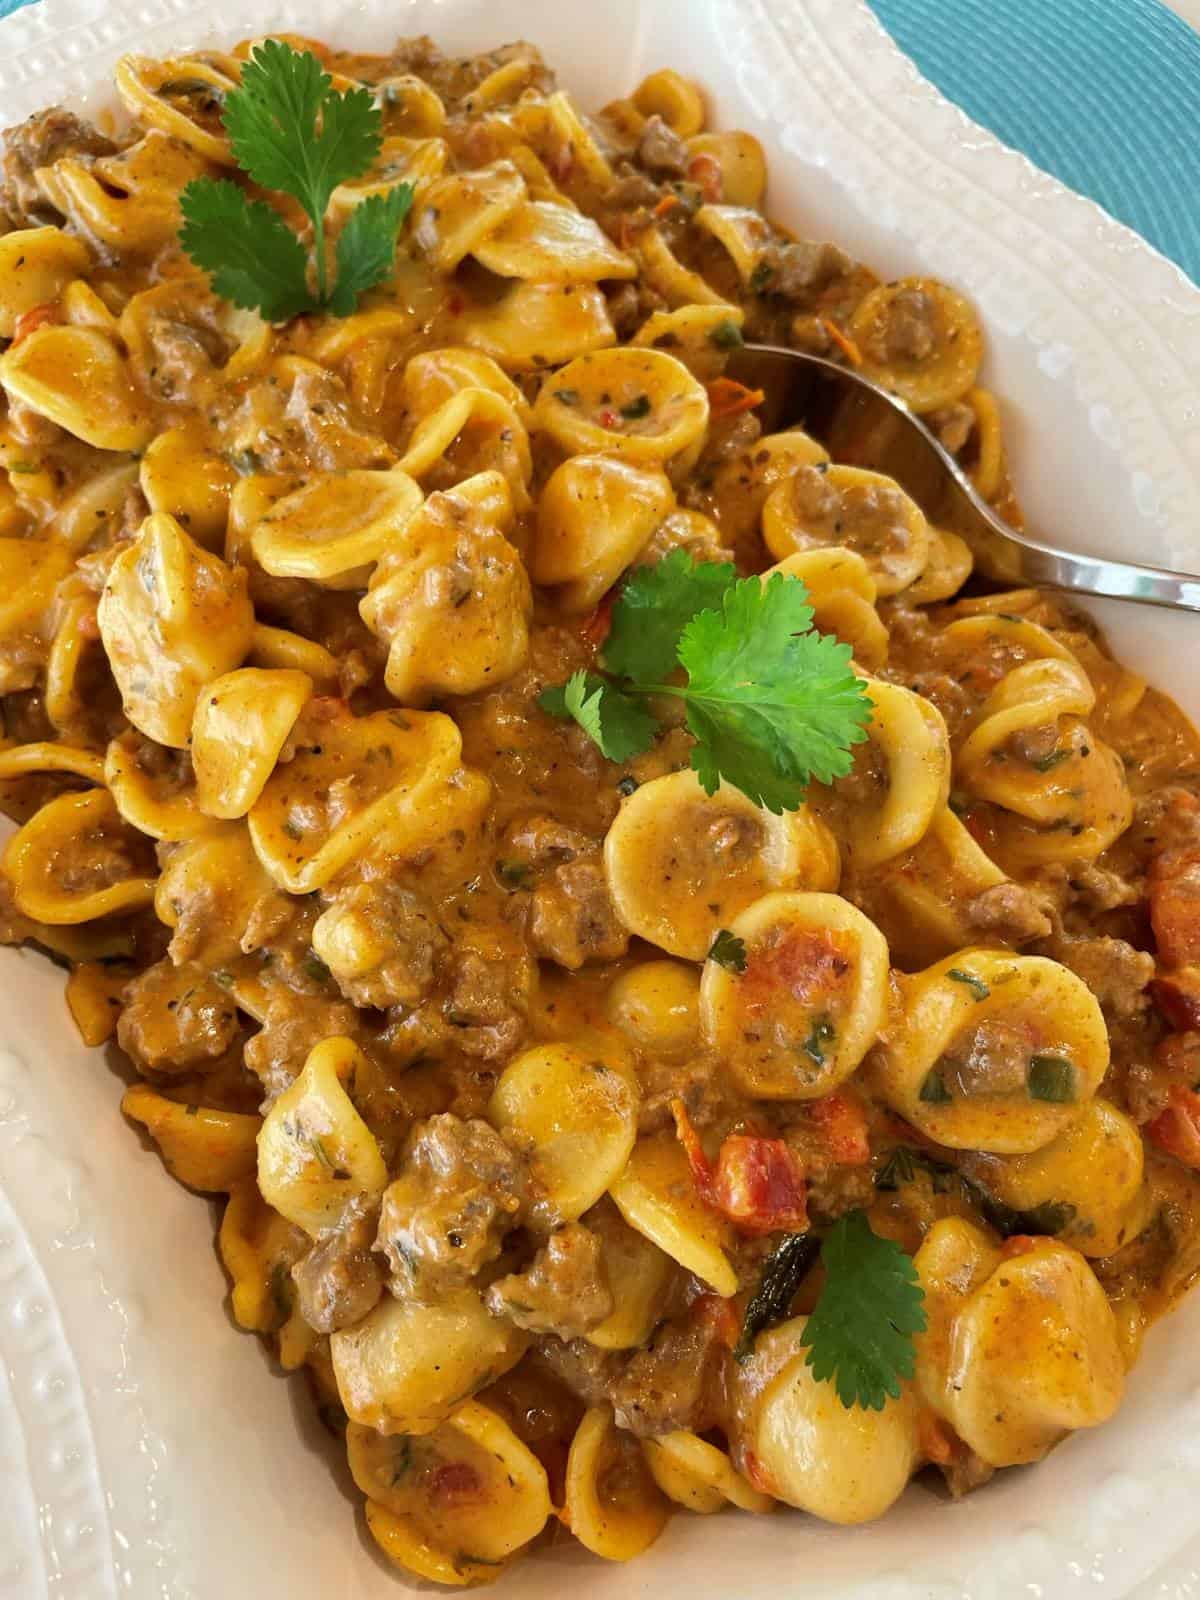 taco pasta casserole seasoned ground beef with a creamy cheesy sauce and pasta